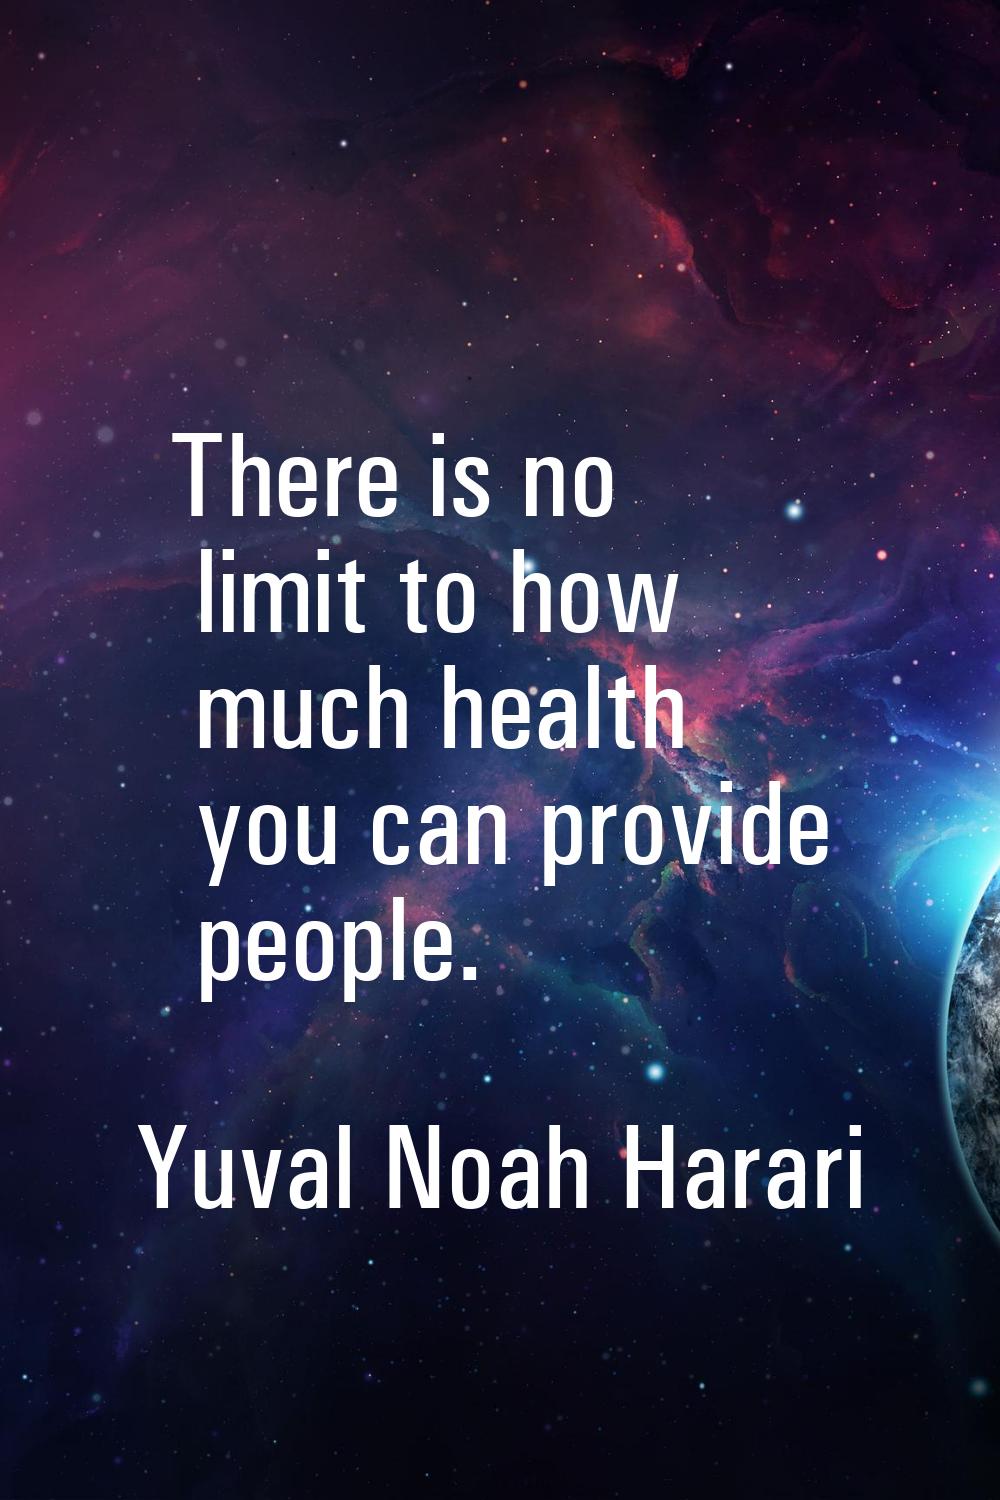 There is no limit to how much health you can provide people.